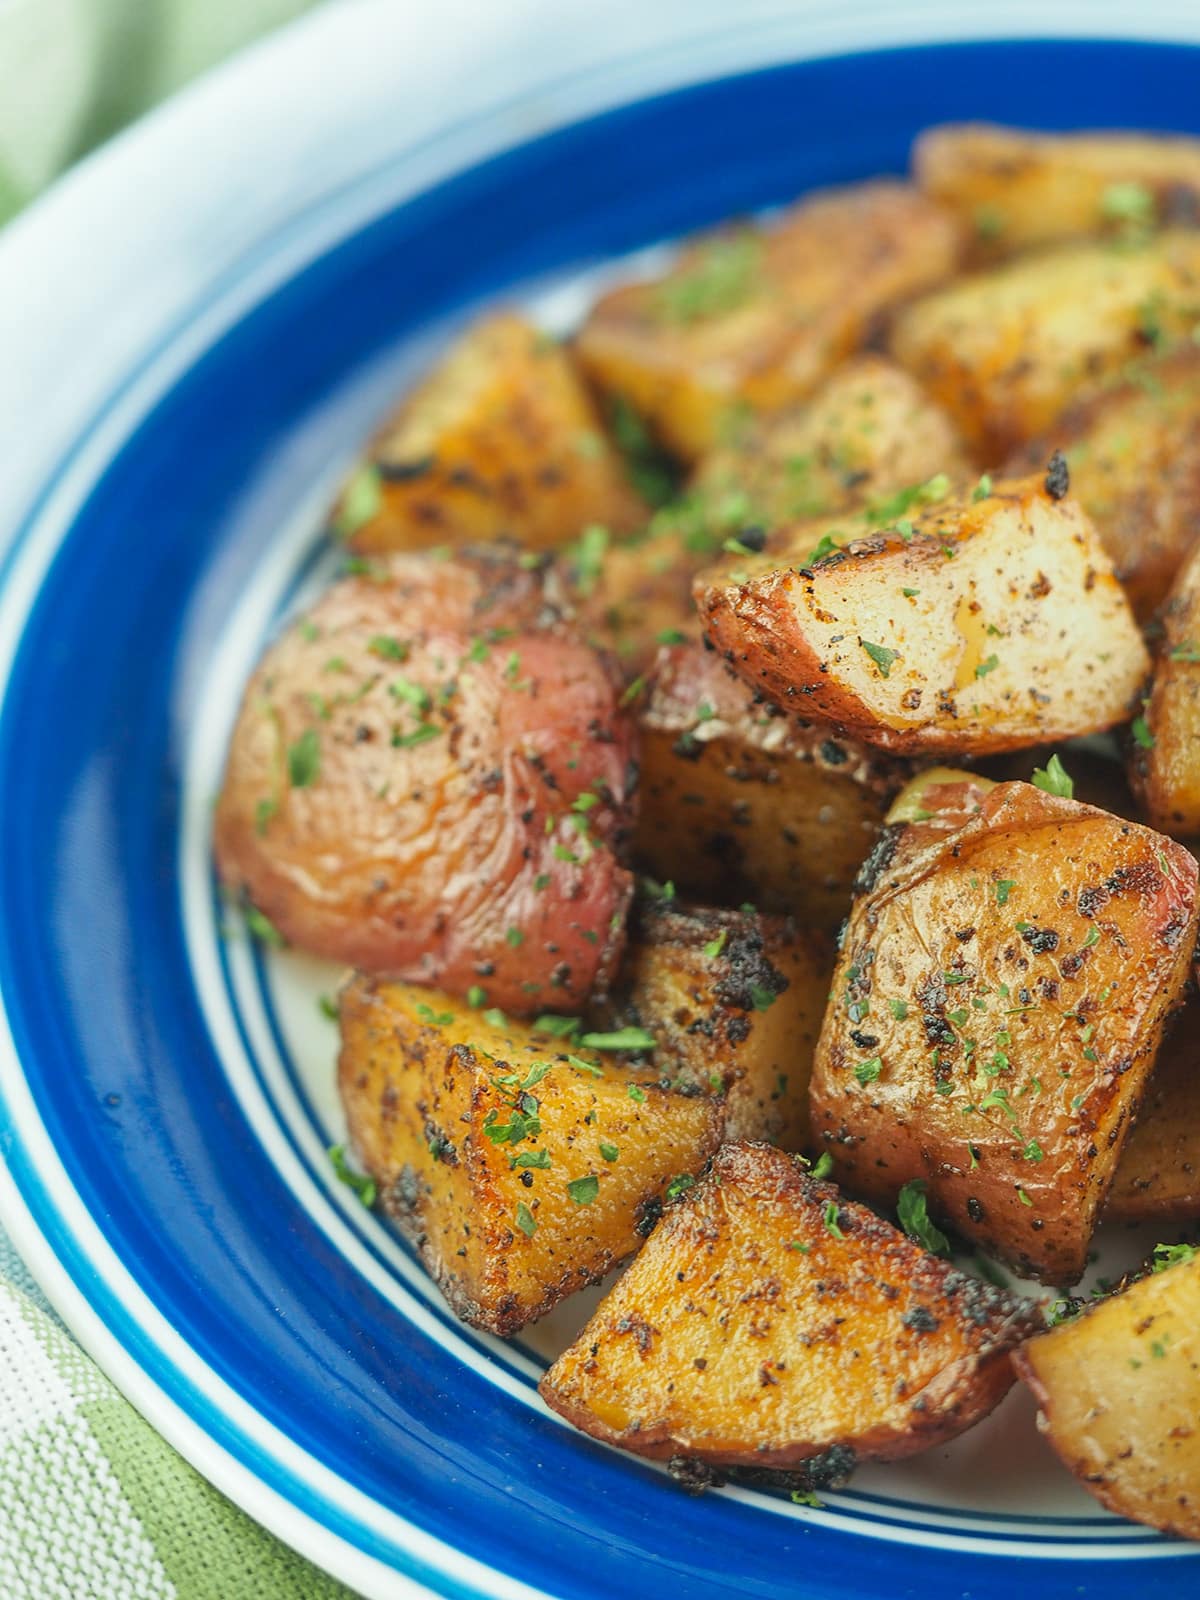 roasted cut potatoes on blue rimmed plate